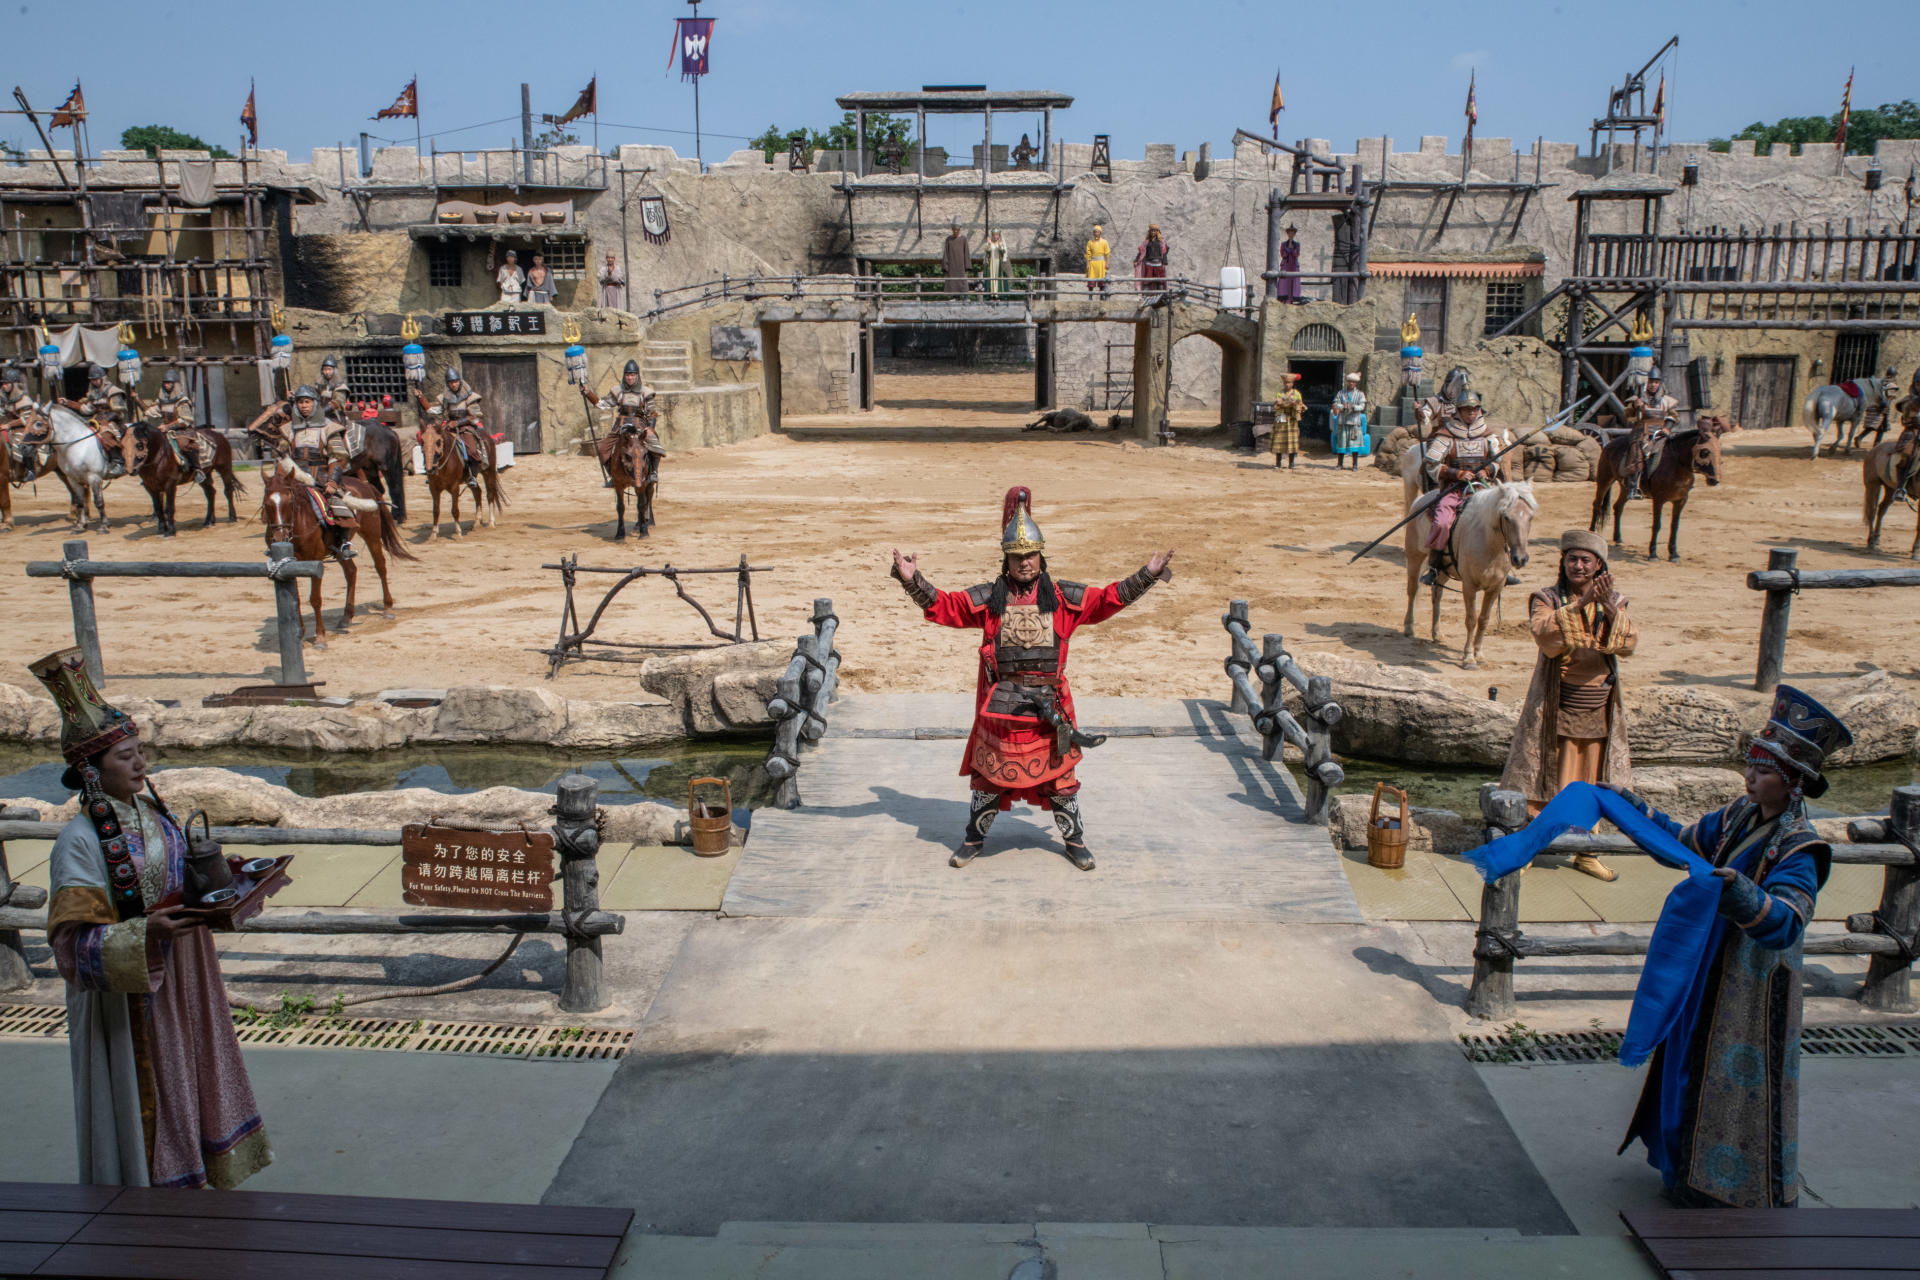 A stunt show recounting the struggle of the armies of Genghis Khan against barbarian invaders, at the 